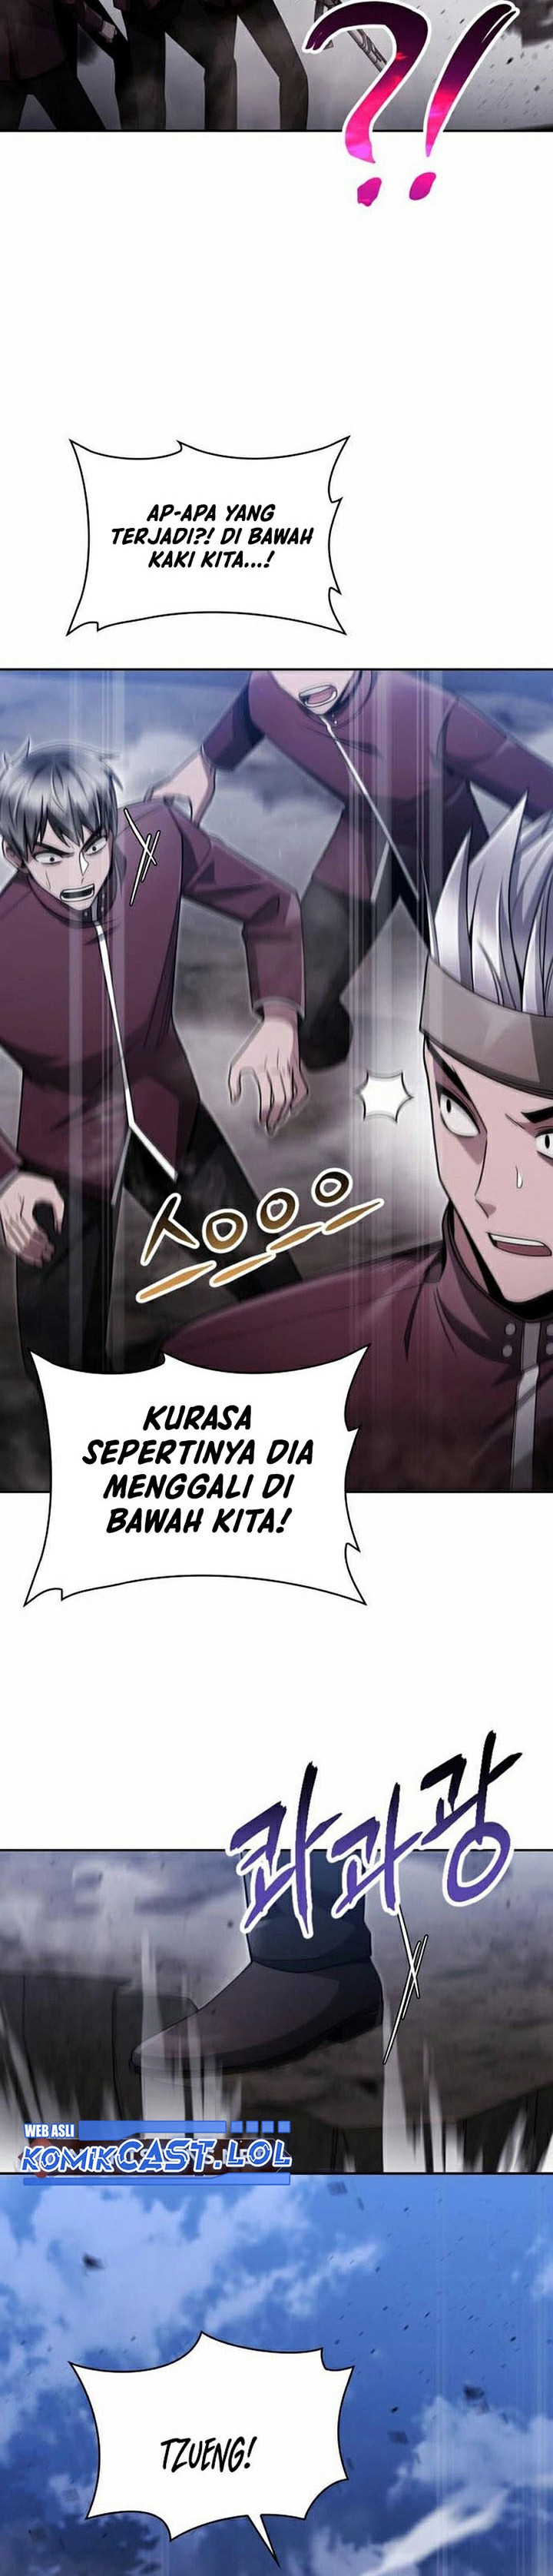 Dilarang COPAS - situs resmi www.mangacanblog.com - Komik clever cleaning life of the returned genius hunter 060 - chapter 60 61 Indonesia clever cleaning life of the returned genius hunter 060 - chapter 60 Terbaru 12|Baca Manga Komik Indonesia|Mangacan